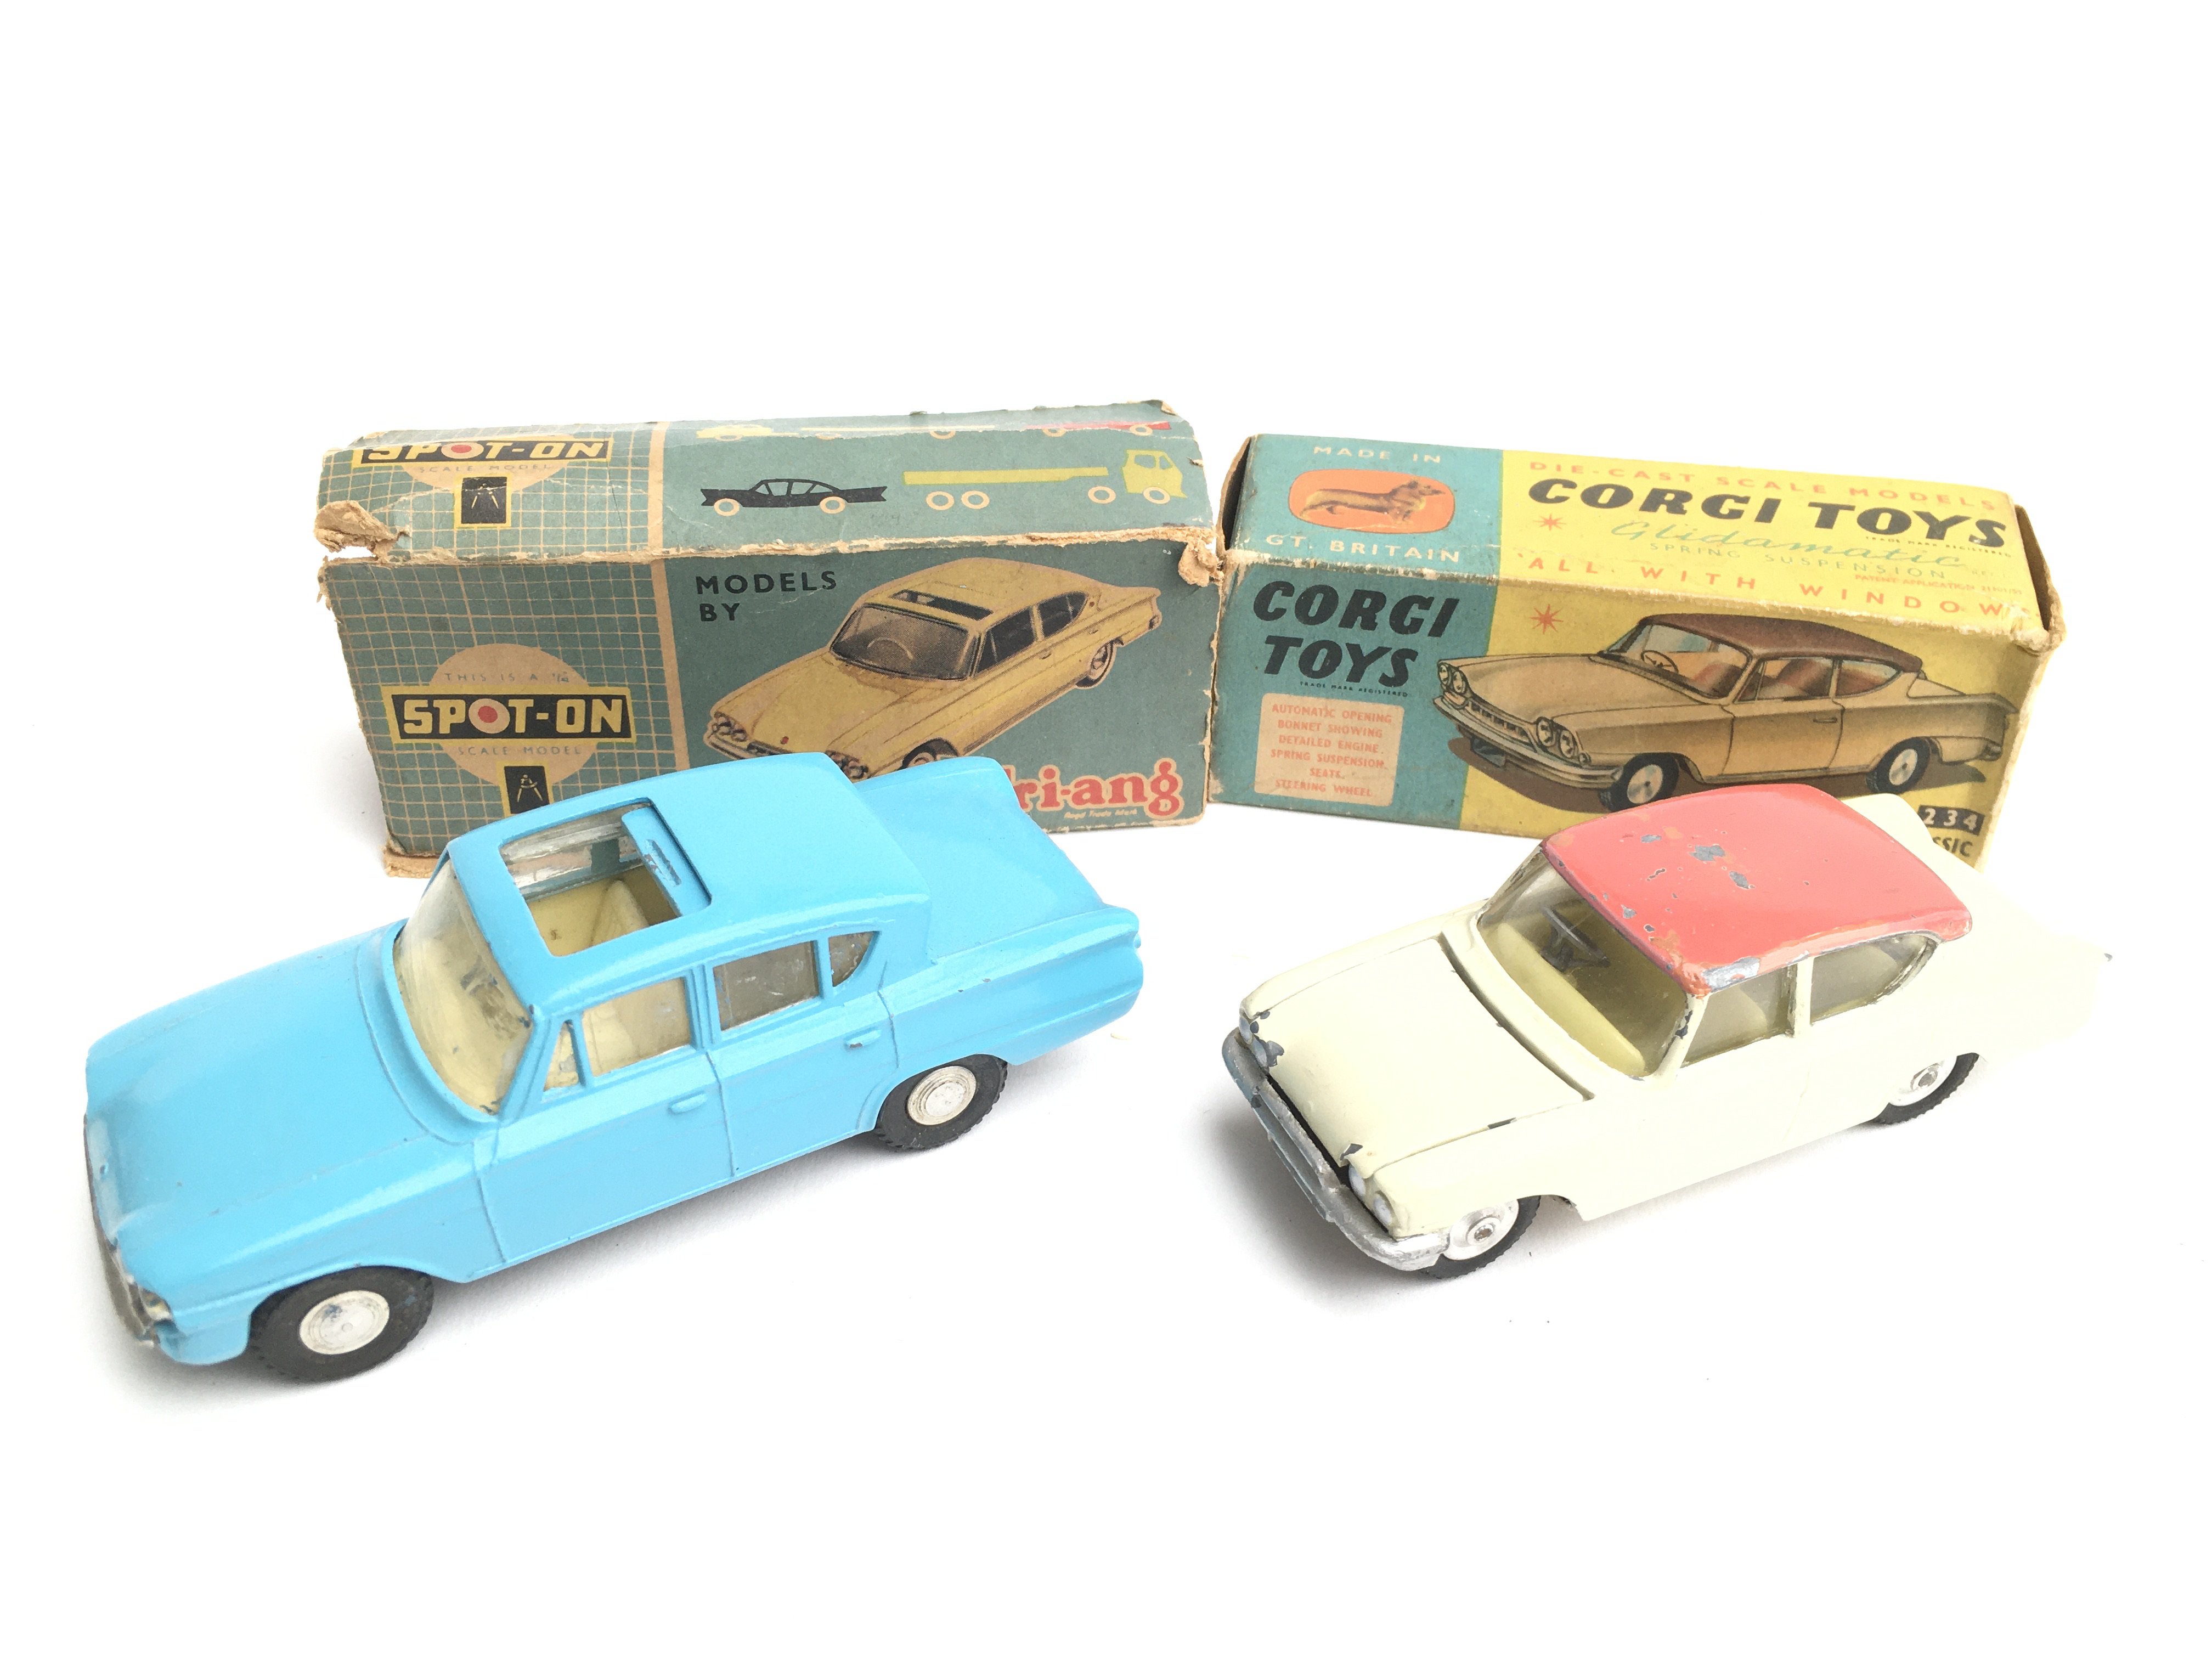 A Boxed Spot-on Consul Classic (Box Is Worn). A Co - Image 4 of 4